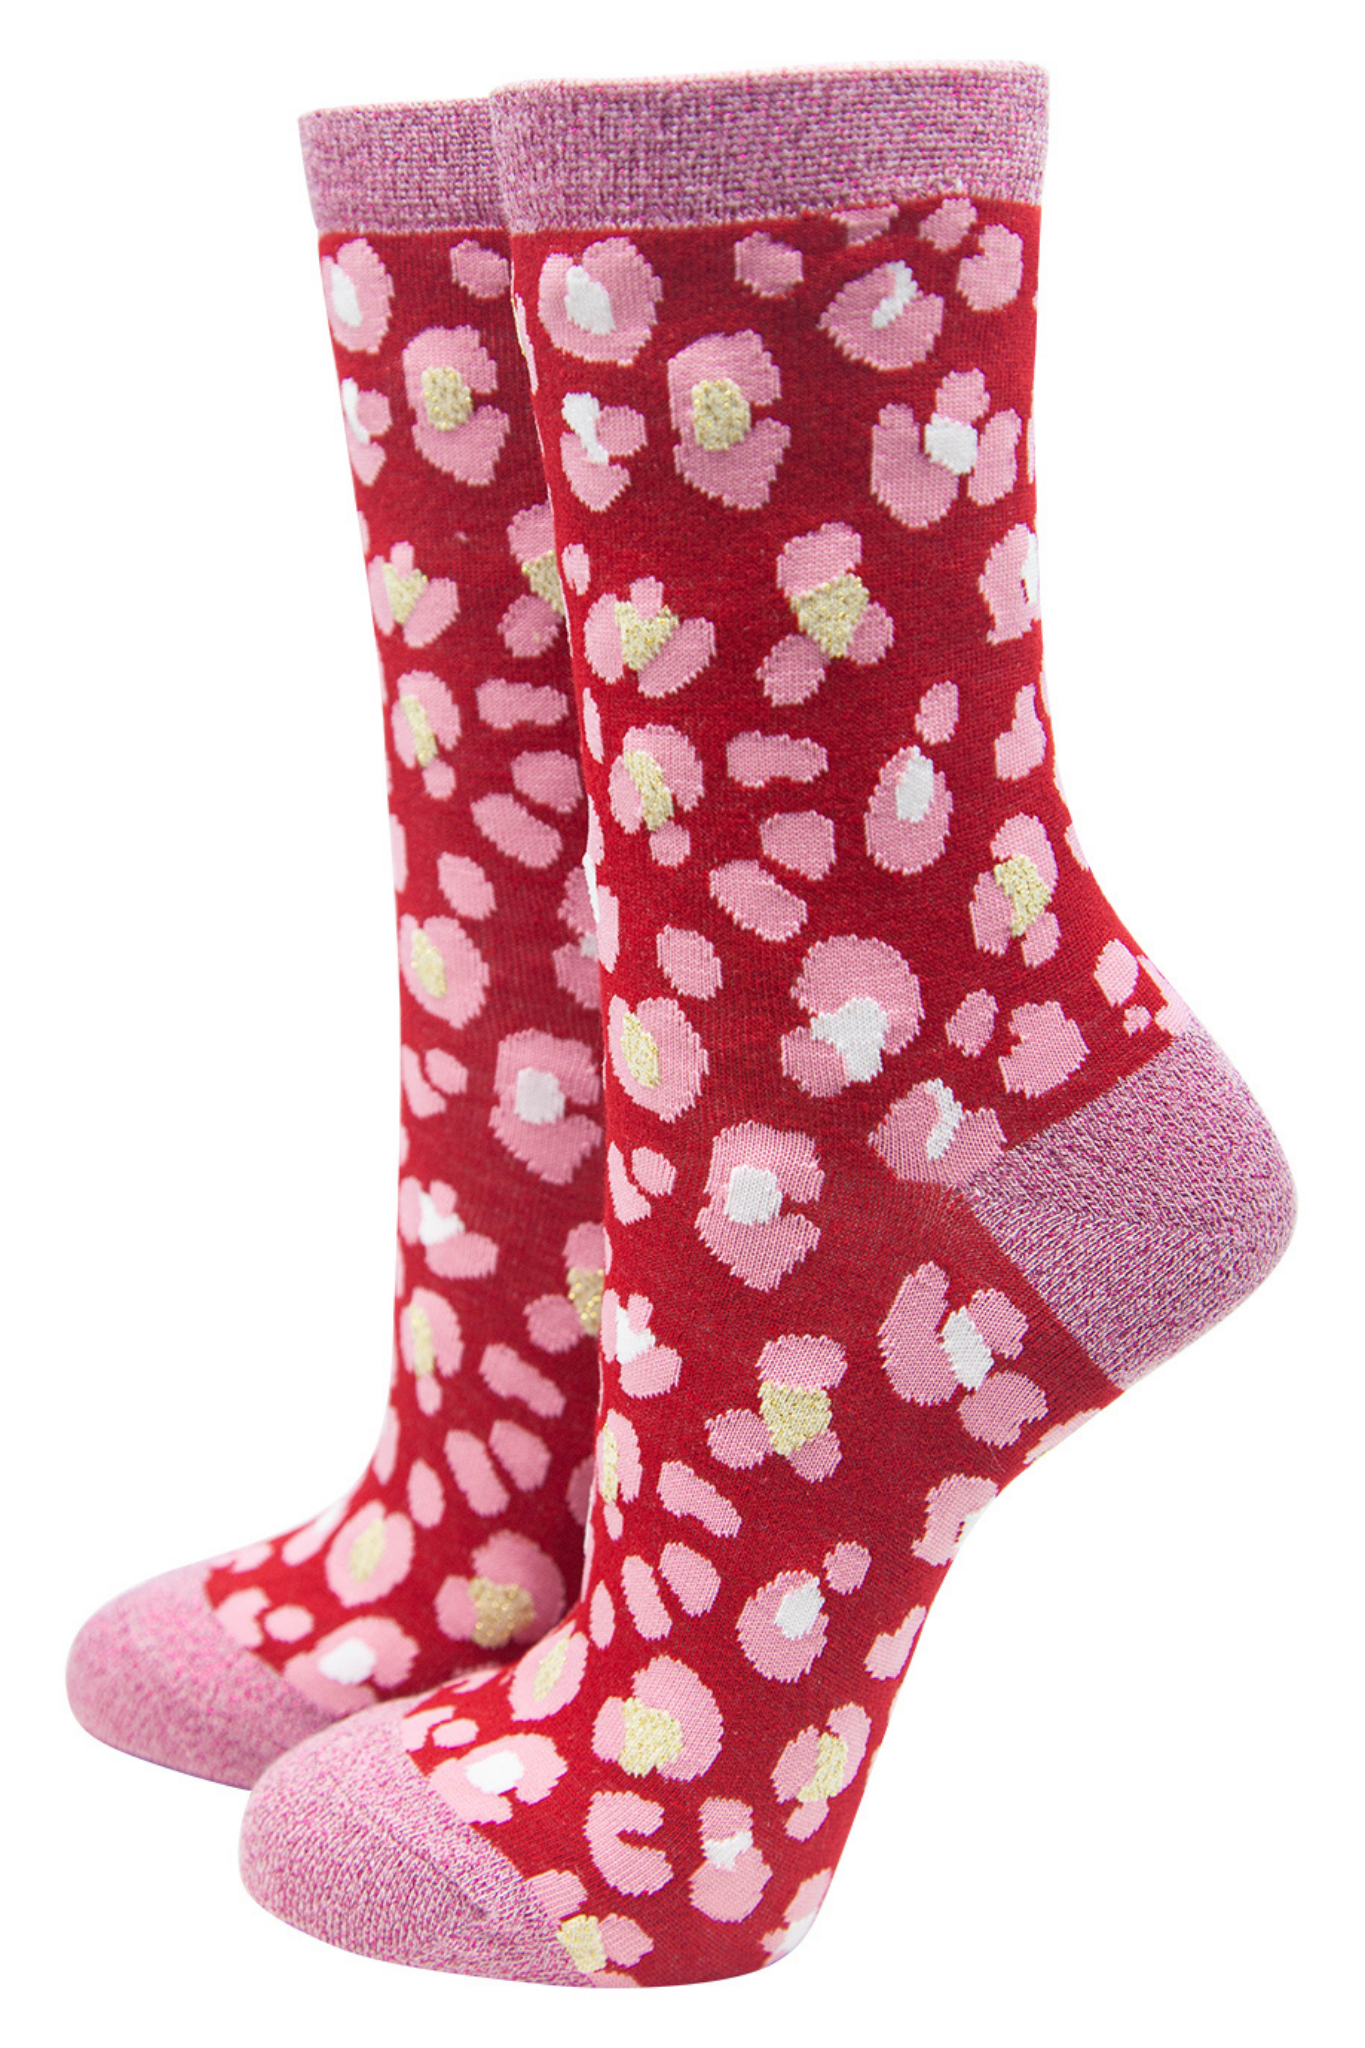 red and pin animal print ankle socks with pink glitter heel, toe and tirm